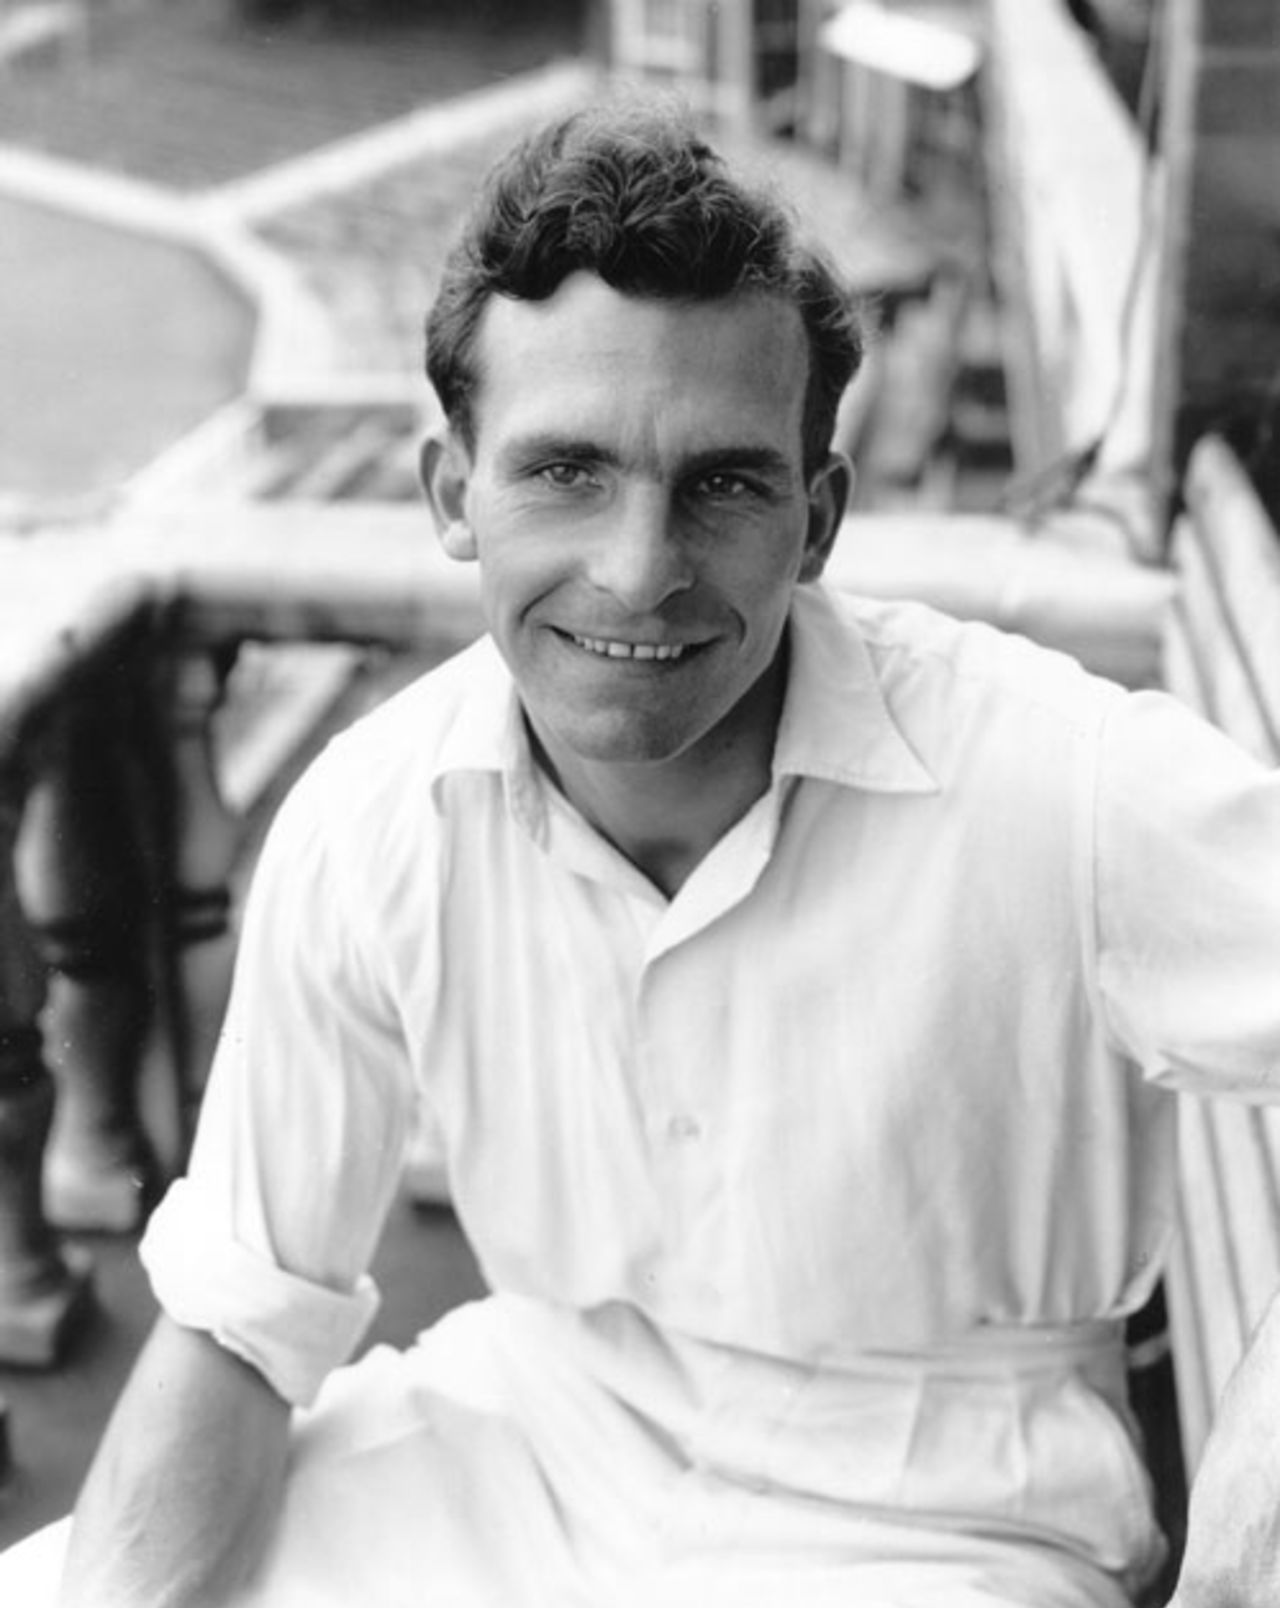 Tommy Greenhough at The Oval after his Test appearance against India where he took five wickets, August 13, 1959